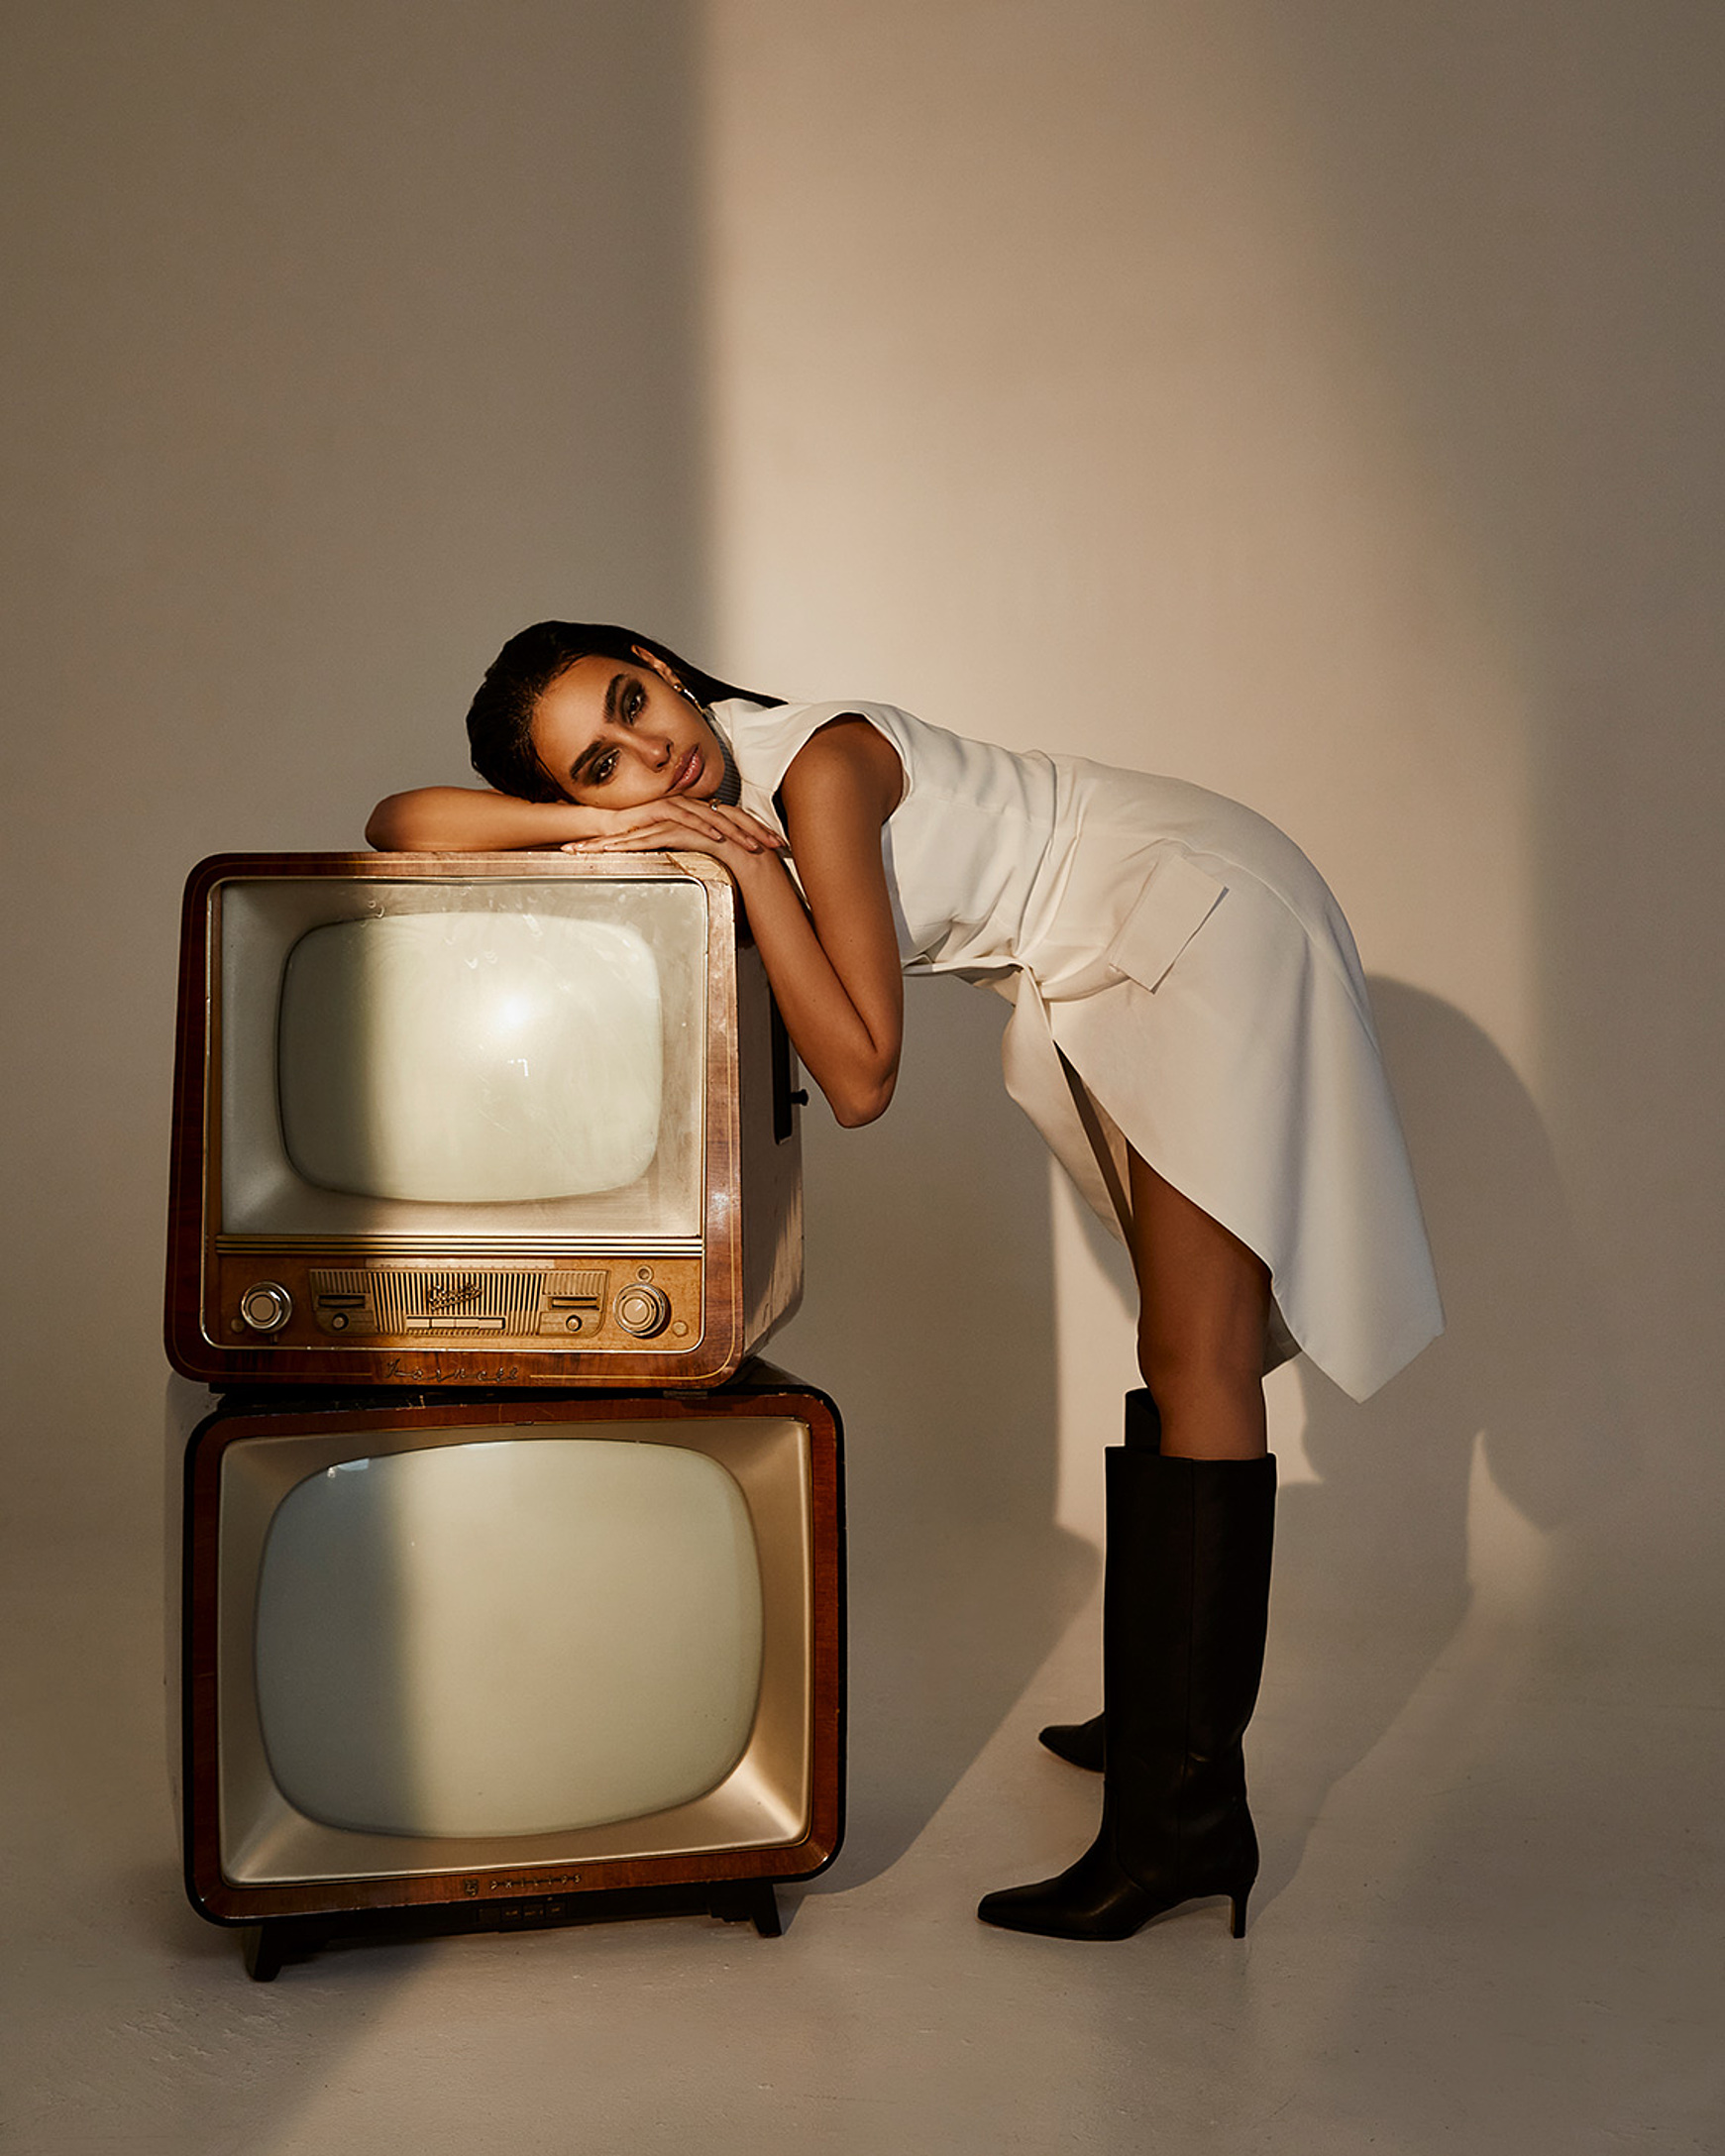 A model lean on stacked televisions in a white dress